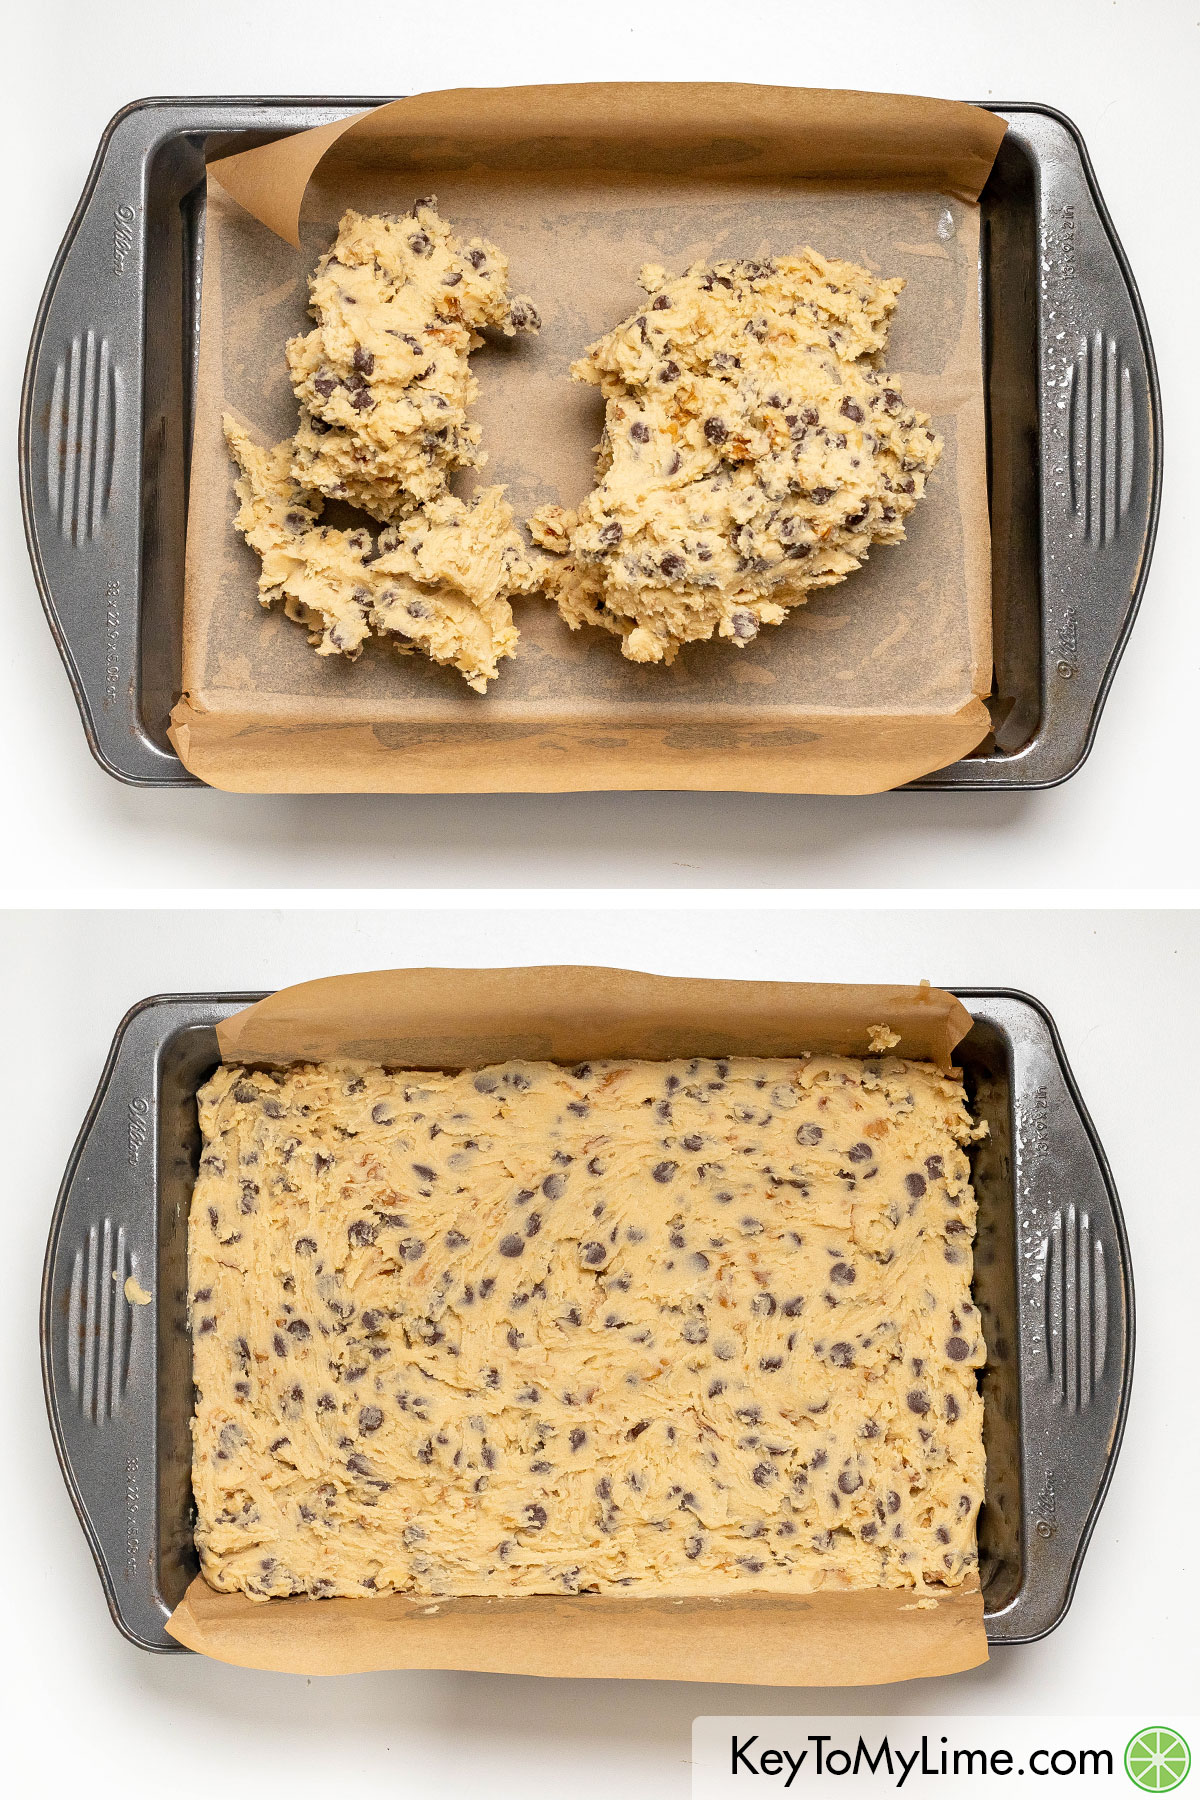 Transferring the cookie batter to a lined baking sheet and spreading out evenly.